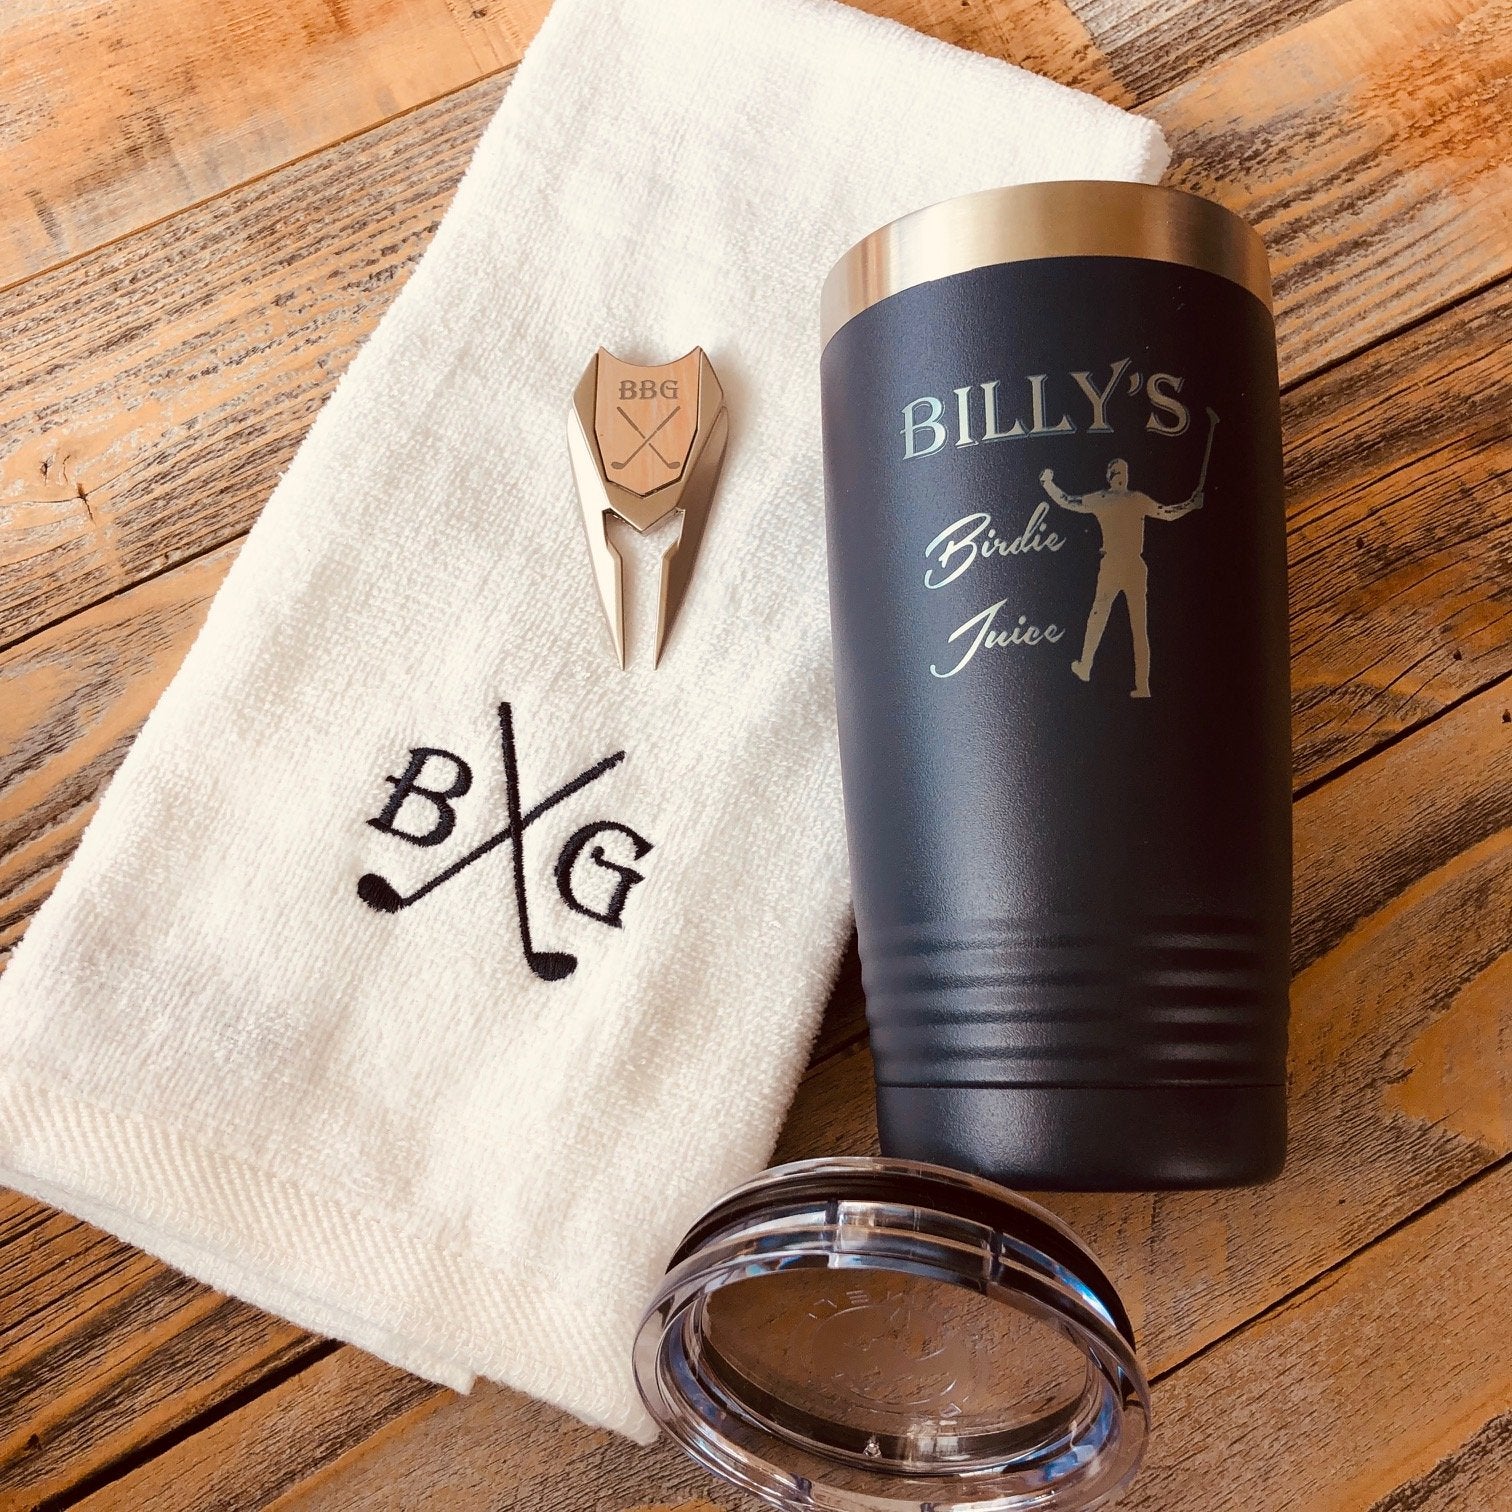  Golf Gift Set Personalized Towel, Divot Tool, Ball Marker, and Tumbler